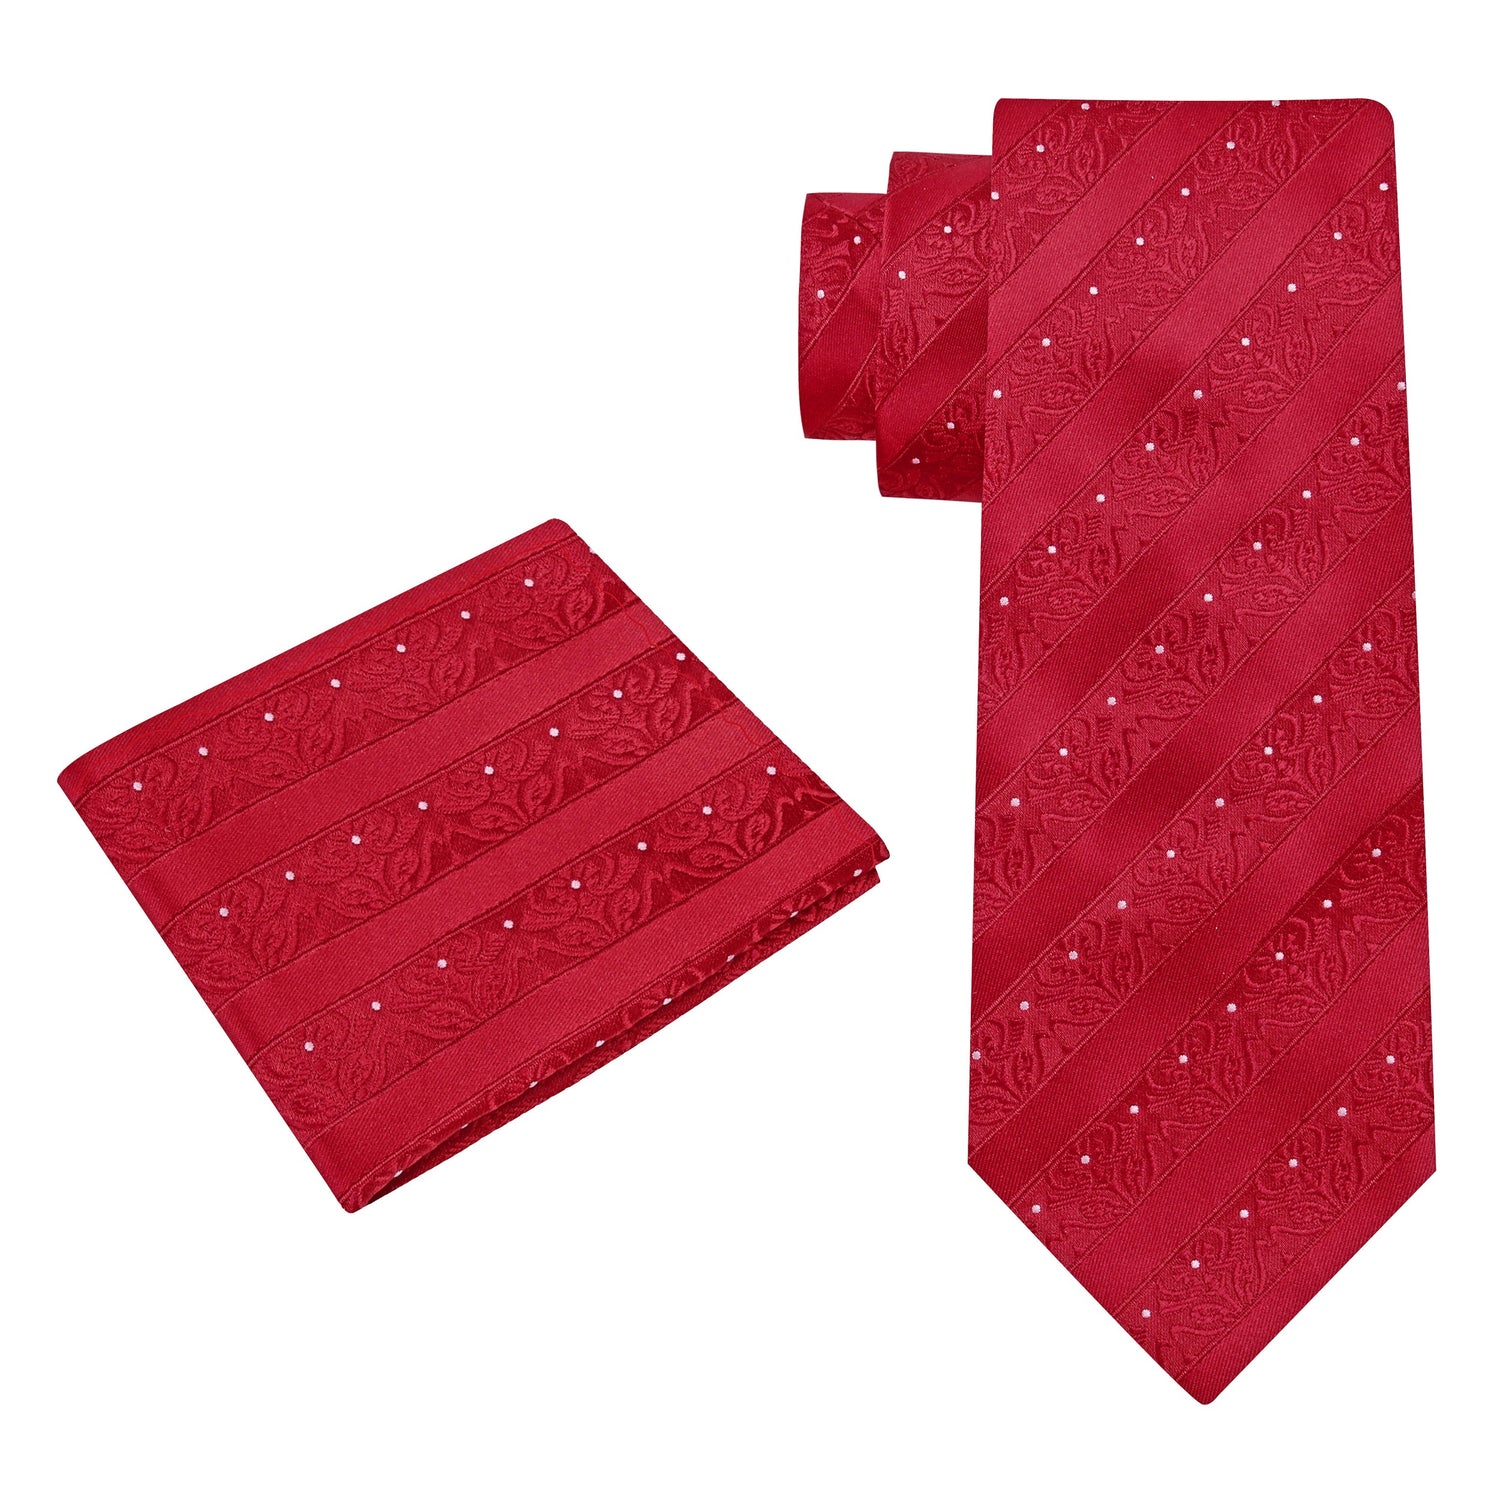 View 2: Red Tie and Square